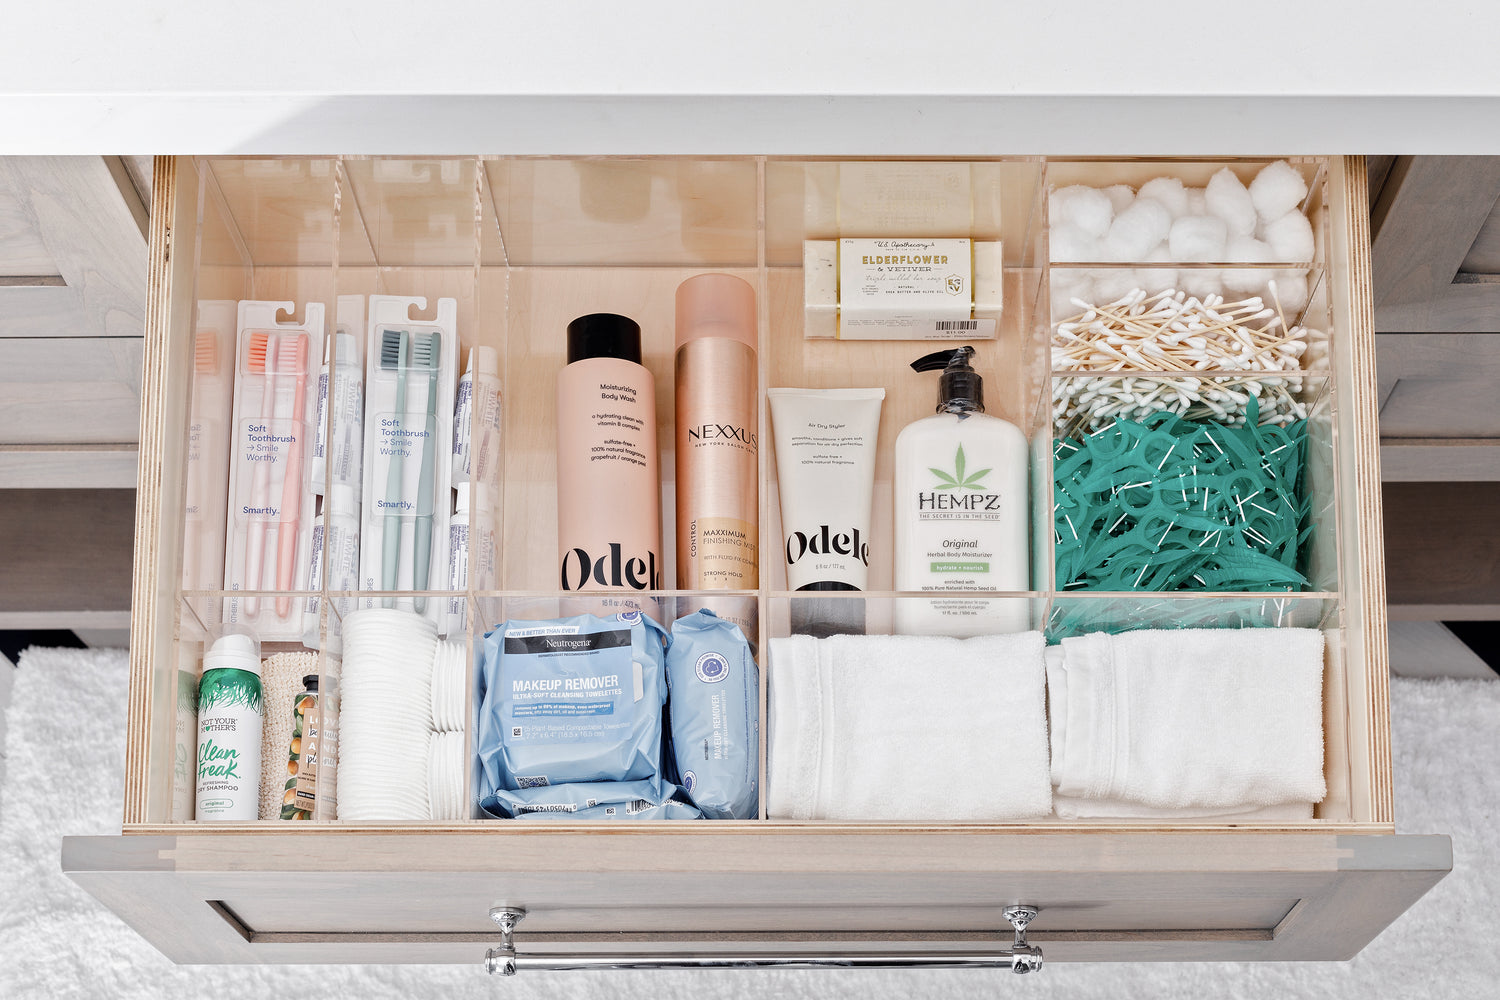 Bathroom drawer filled with supplies including toothbrushes, makeup wipes, and lotion, neatly organized with the Jennifer custom-fit organizer.